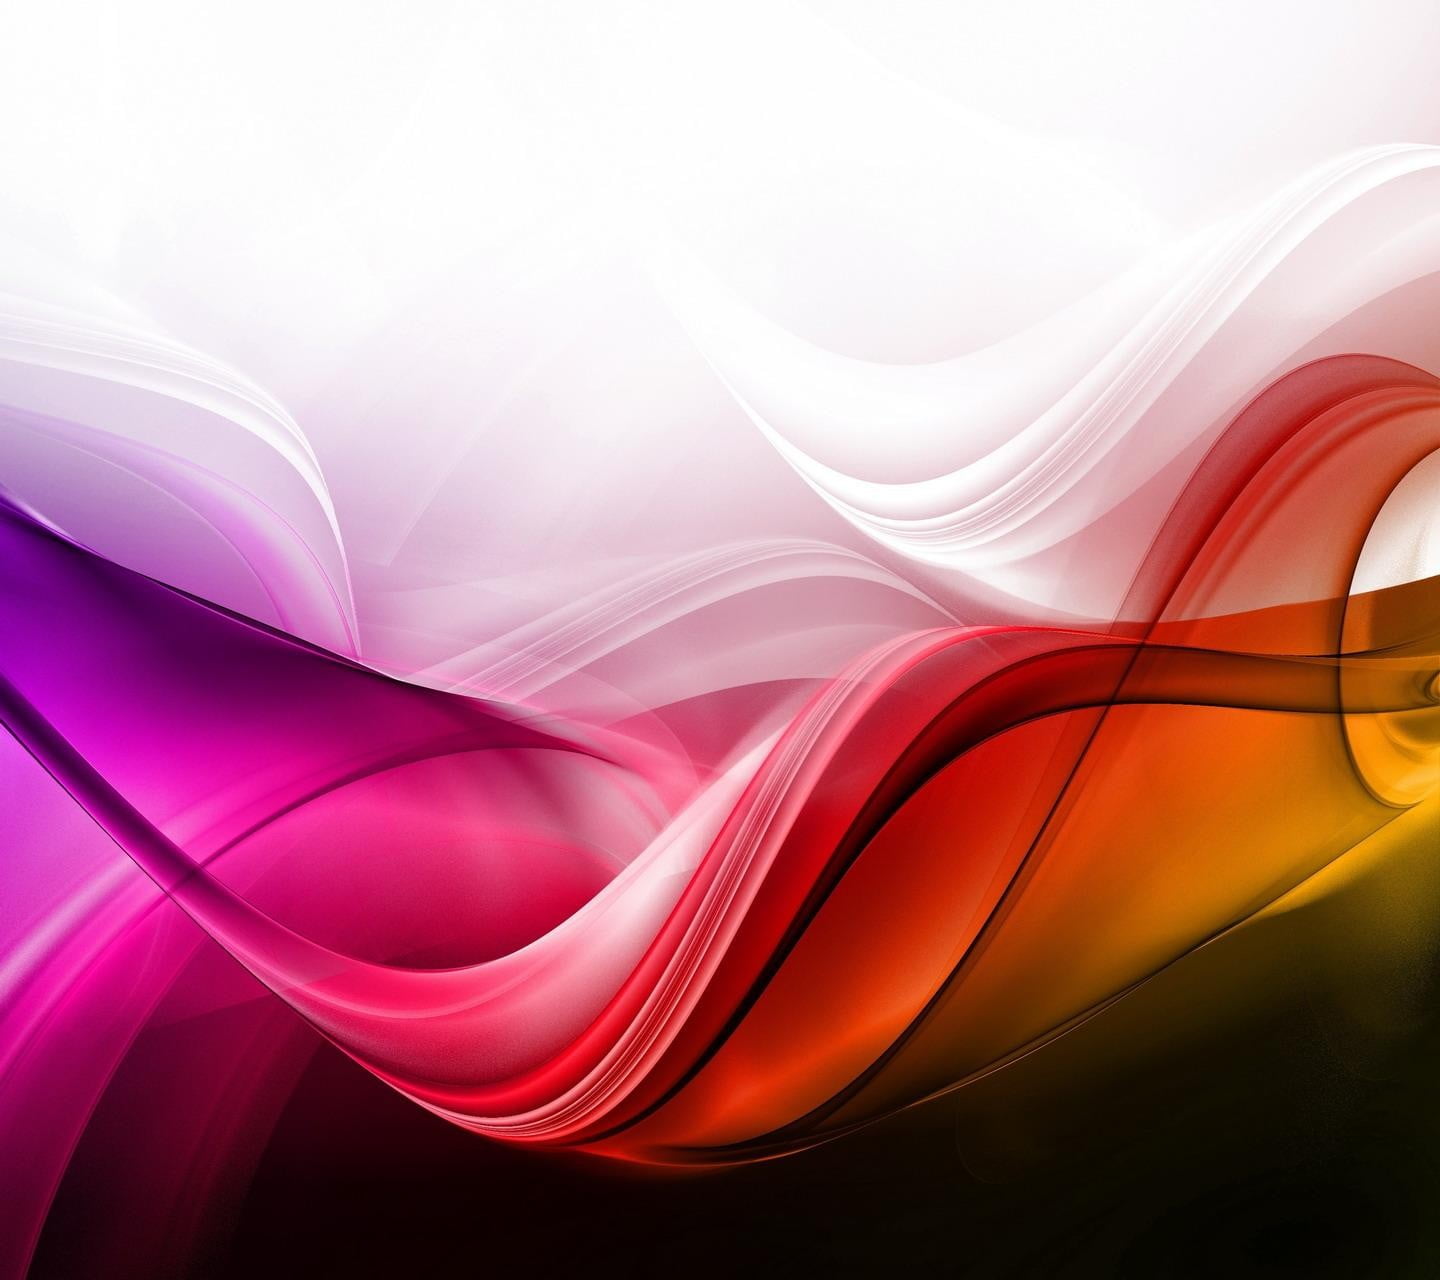 red, orange, and purple abstract art, swirls, colorful, backgrounds